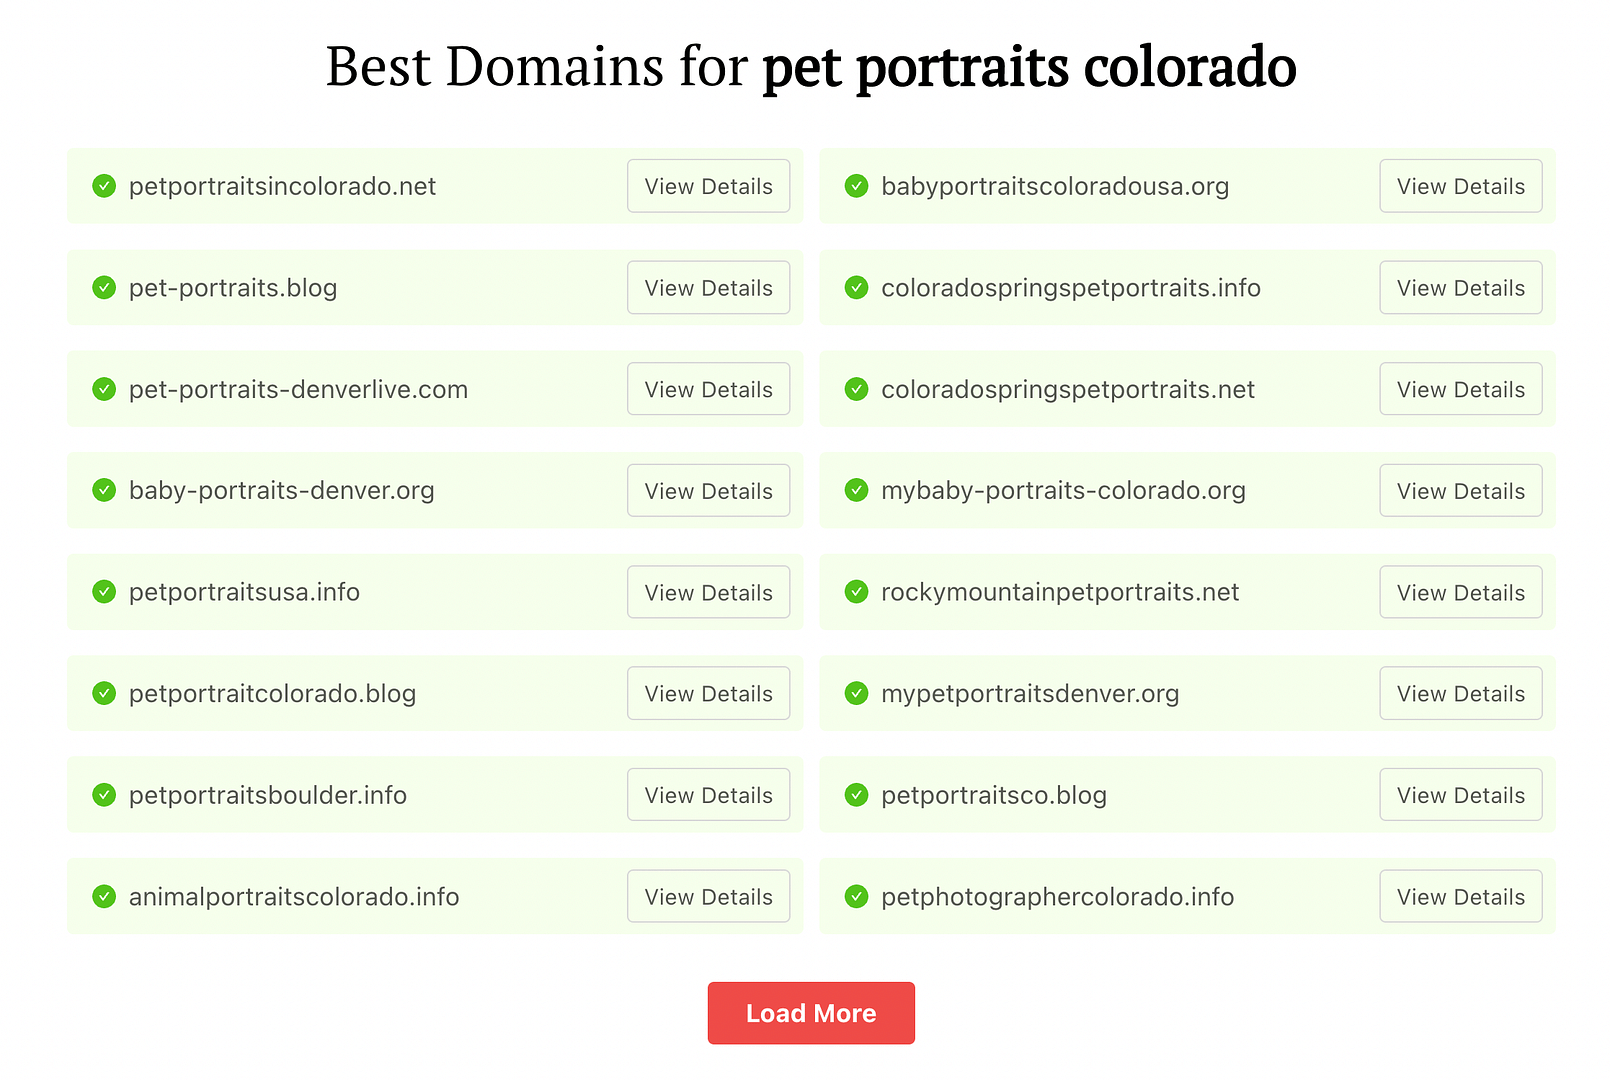 Domain name generator results for regional pet portraits.